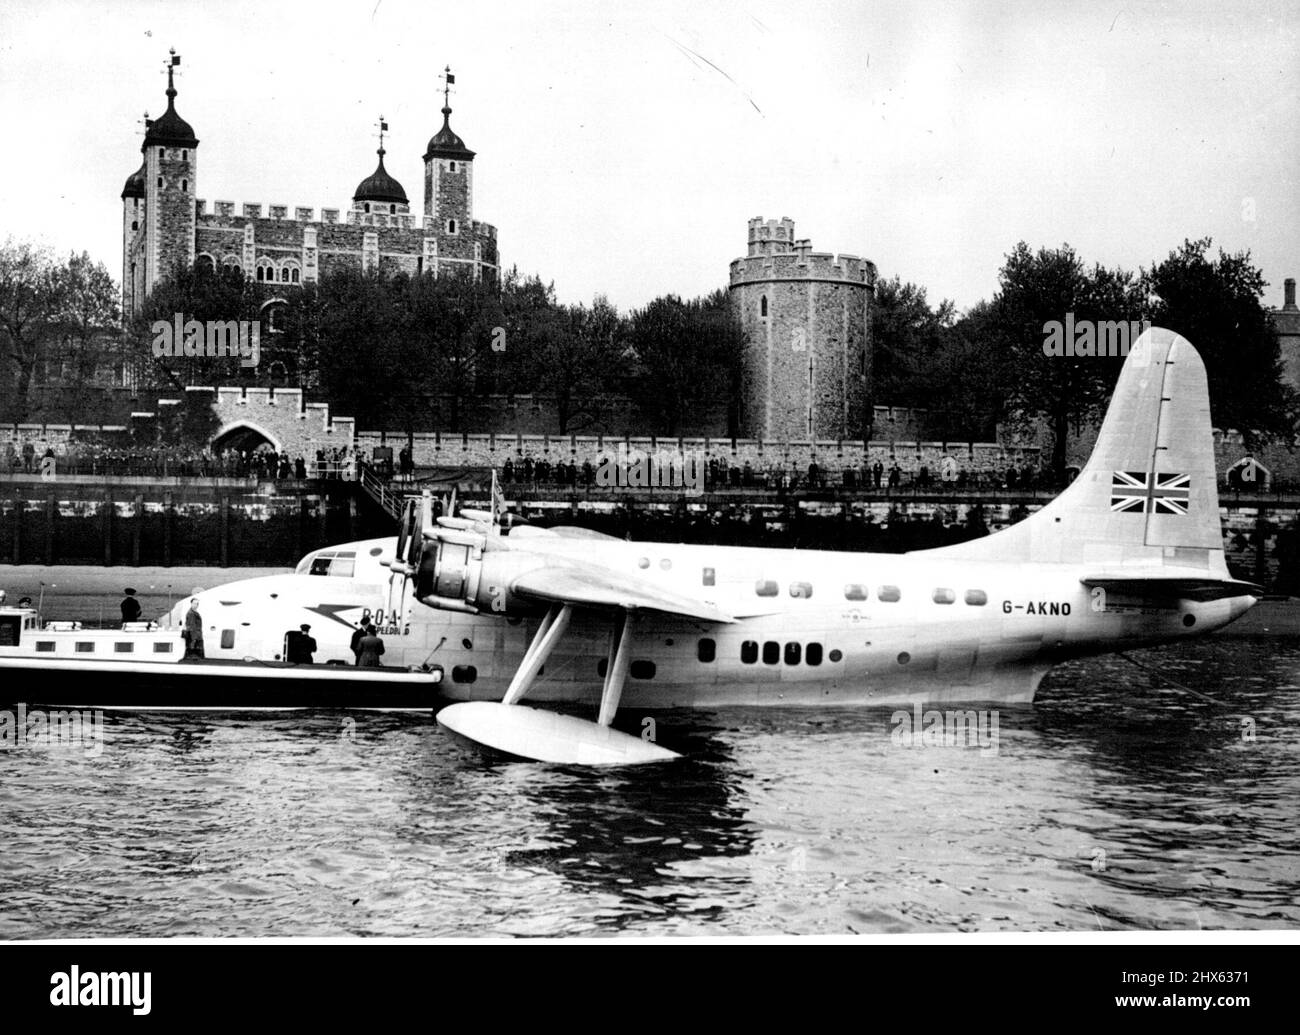 Flying Boat Moored on Thames. Moored at Tower Pier with the Tower of London in the background. The London Thames carried a different boat yesterday this 35-ton Short Solent, largest of Britain's commercial flying boats. The Solent, first flying boat to land in the London area for twenty-one years, touched down at Limehouse Reach and taxied up the river through the Tower Bridge. The bridge was raised to make sure the Solent's high tall did not foul it. She was finally moored near Tower Bridge. Ma Stock Photo